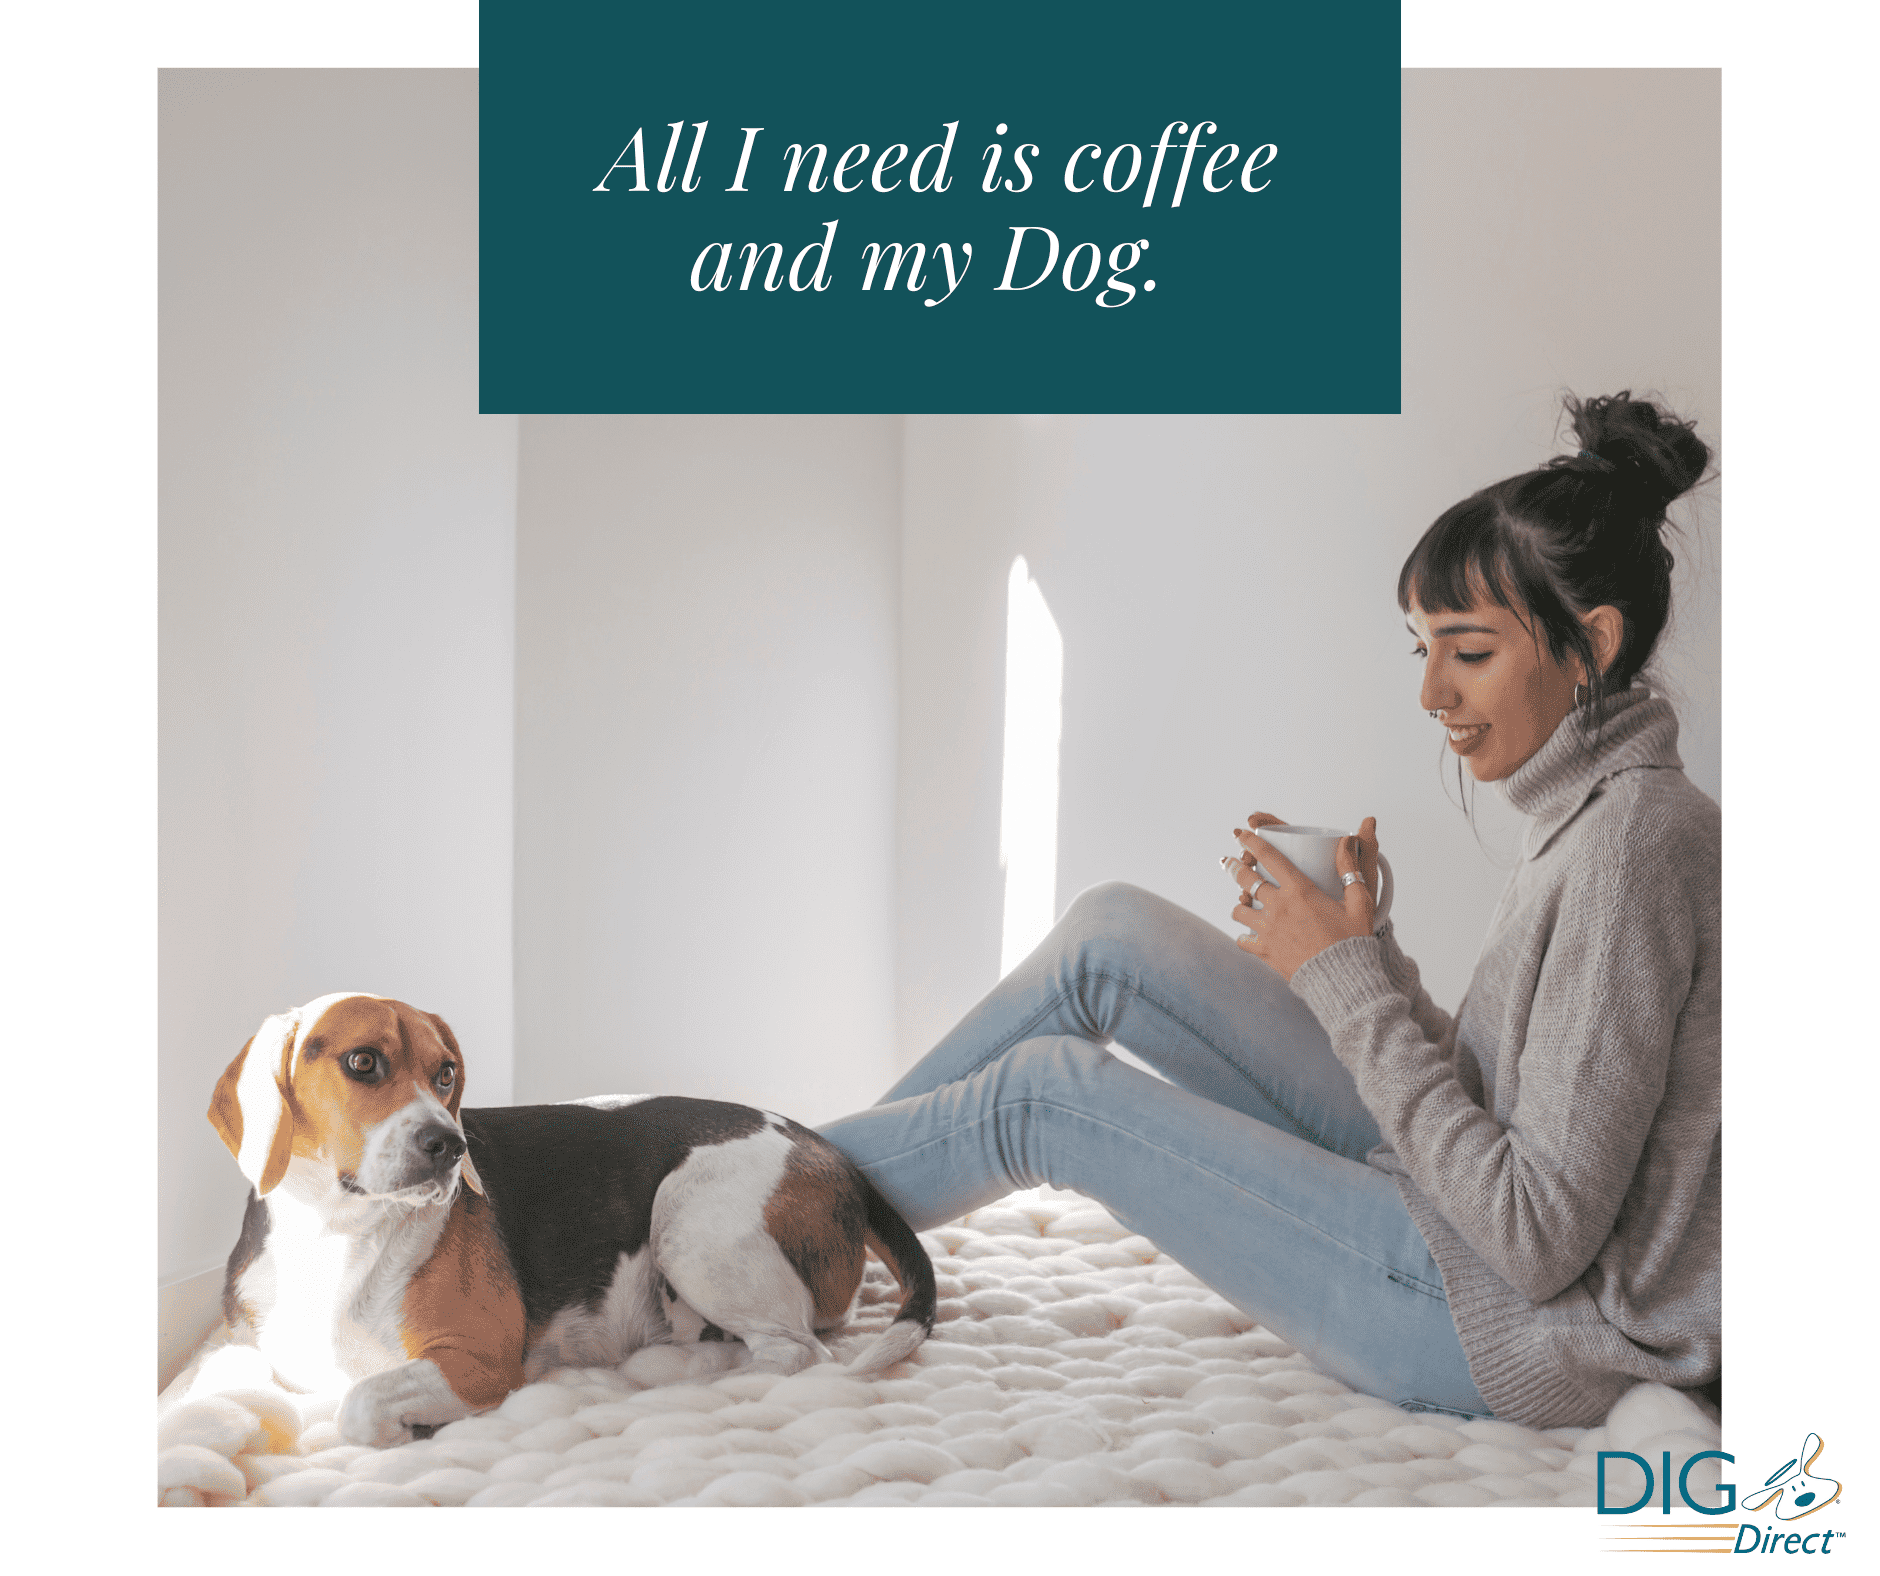 Coffee and your dog